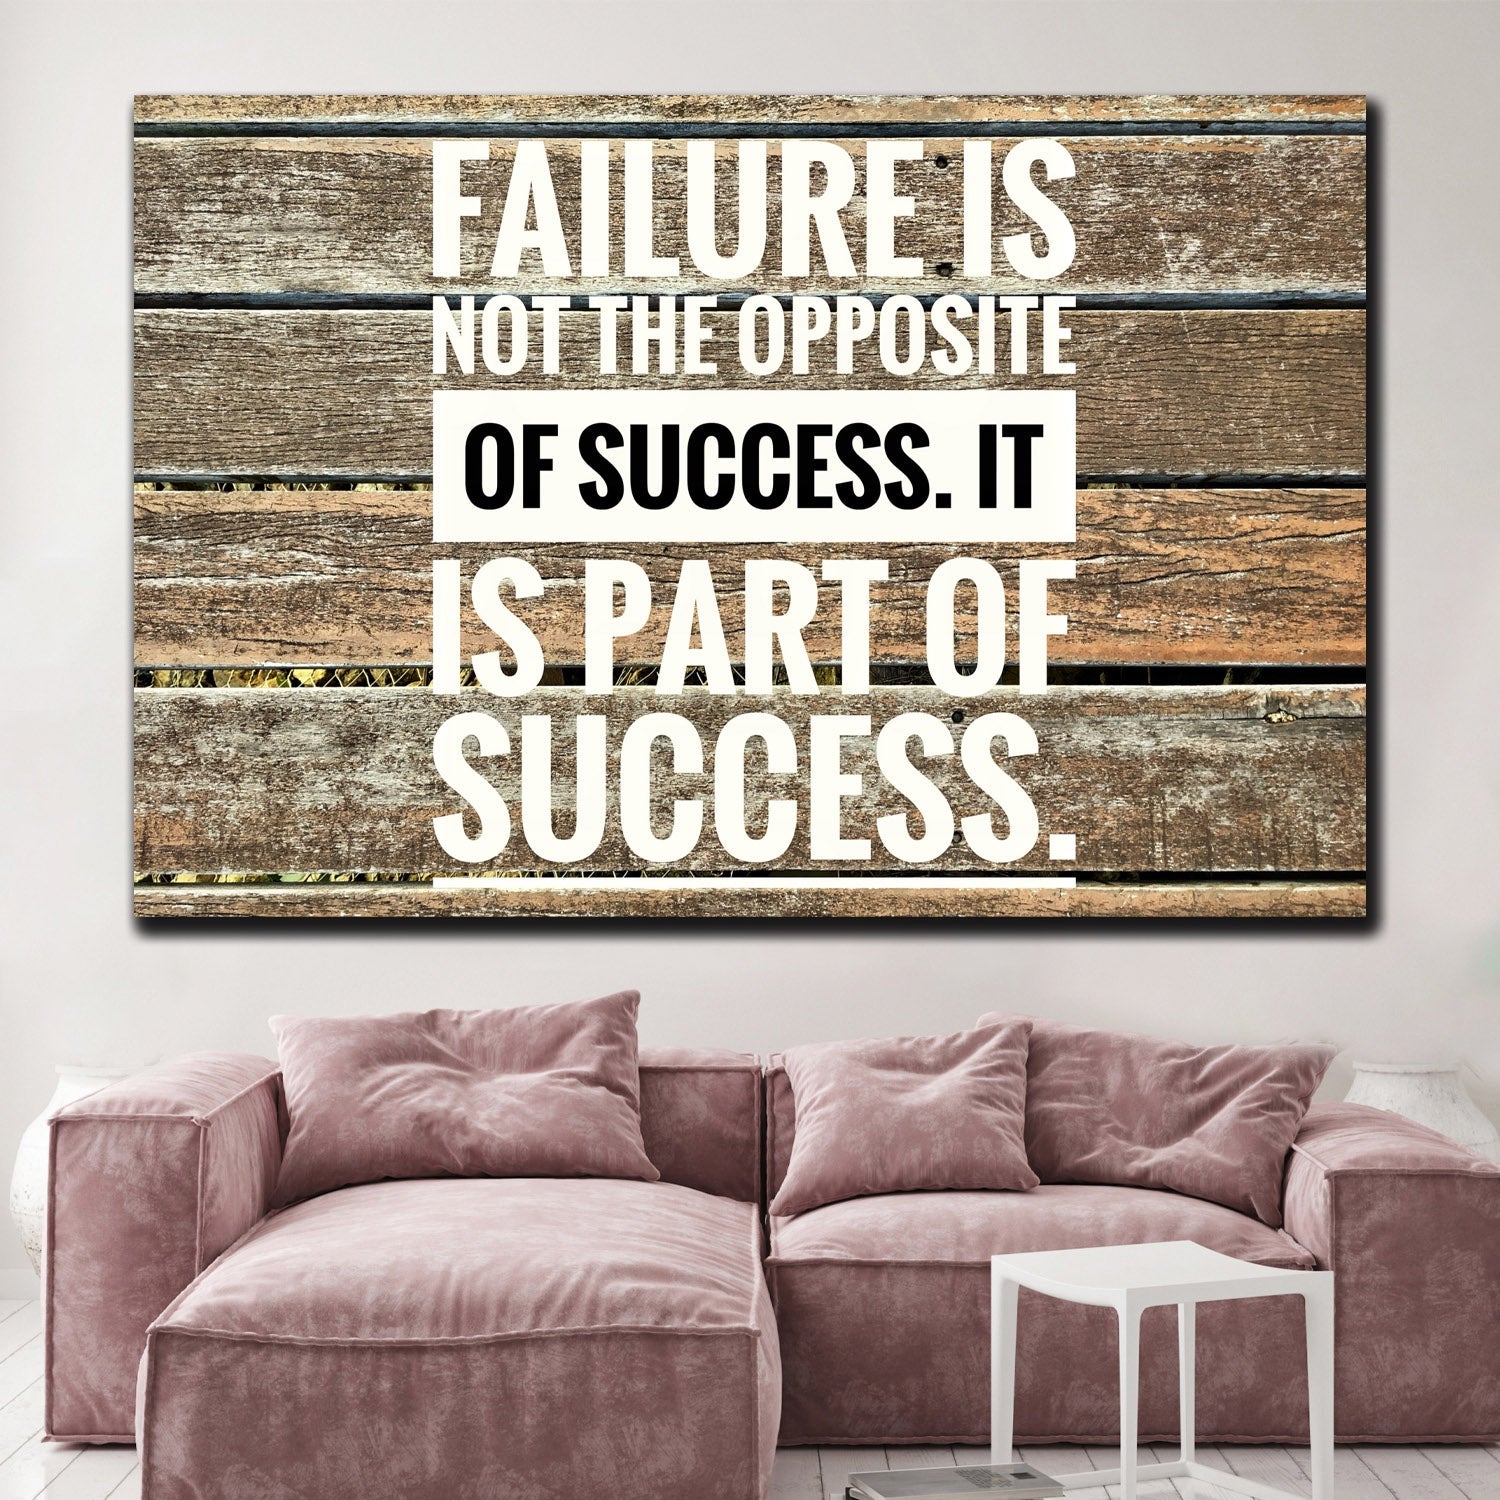 https://cdn.shopify.com/s/files/1/0387/9986/8044/products/FailureQuoteCanvasArtprintStretched-2.jpg